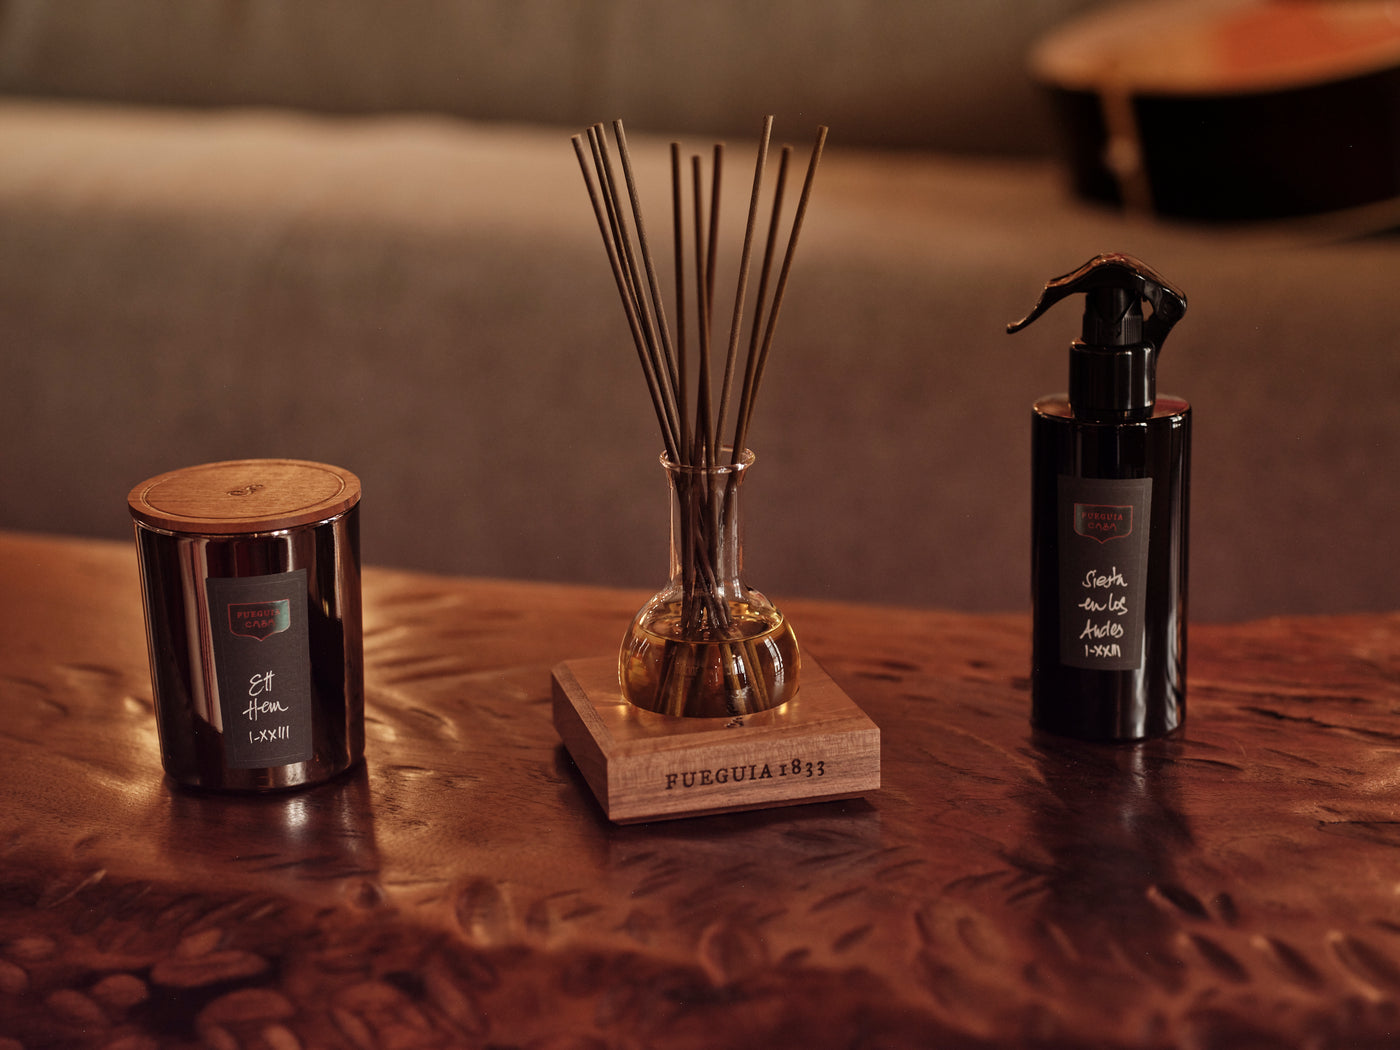 Fueguia Casa: Unique Home Collection that includes Candles, Diffusers, Room Sprays 